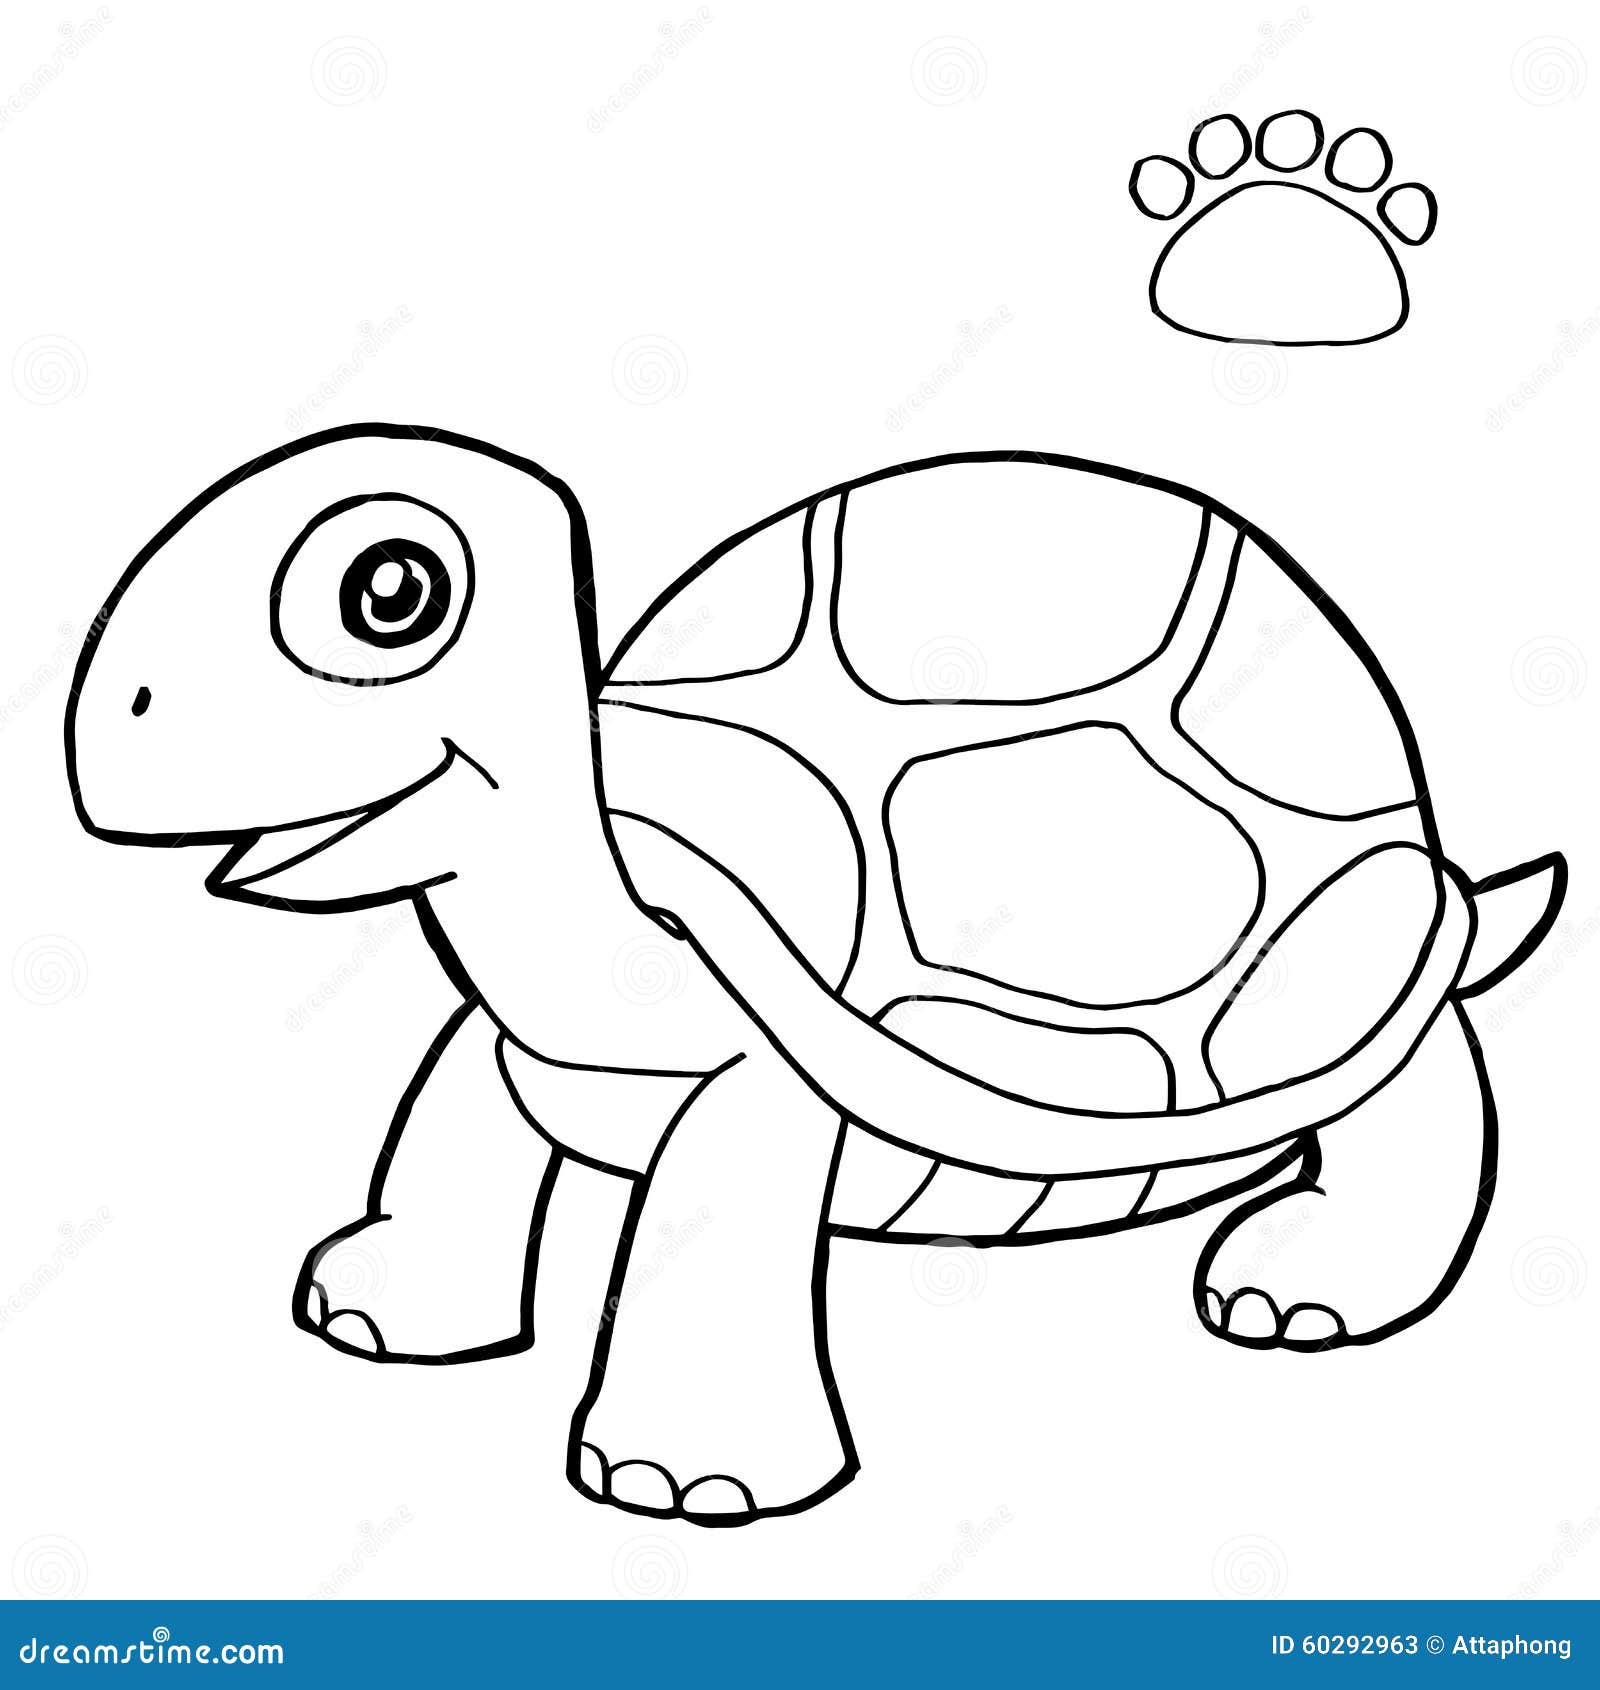 Turtle coloring pages stock illustrations â turtle coloring pages stock illustrations vectors clipart